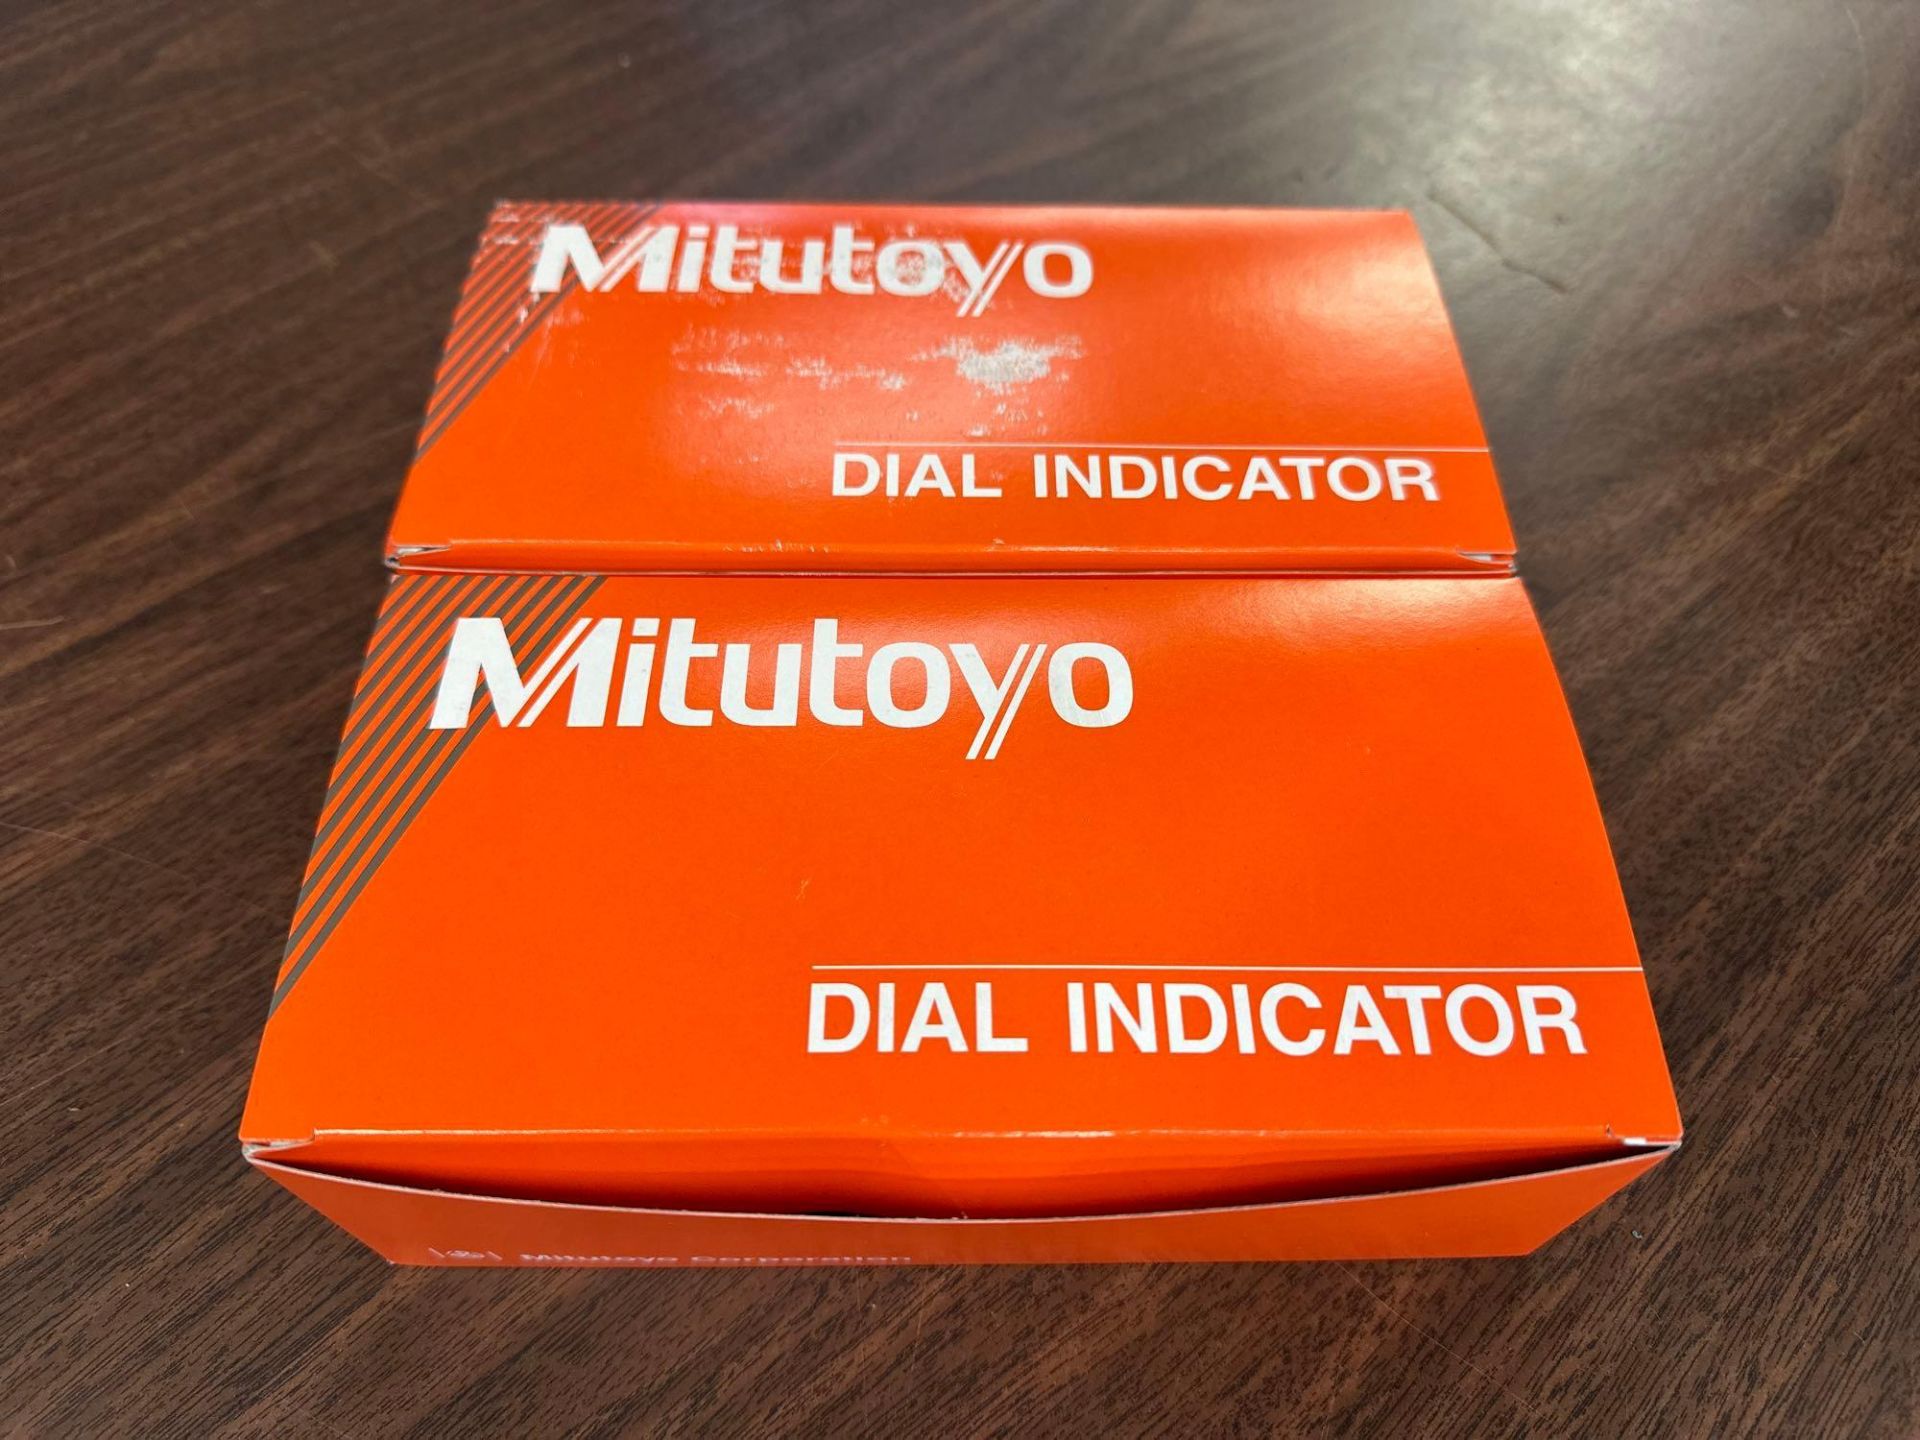 Lot of 2 New Mitutoyo Dial Indicator Model: 2416A .001” Grad. See photo.